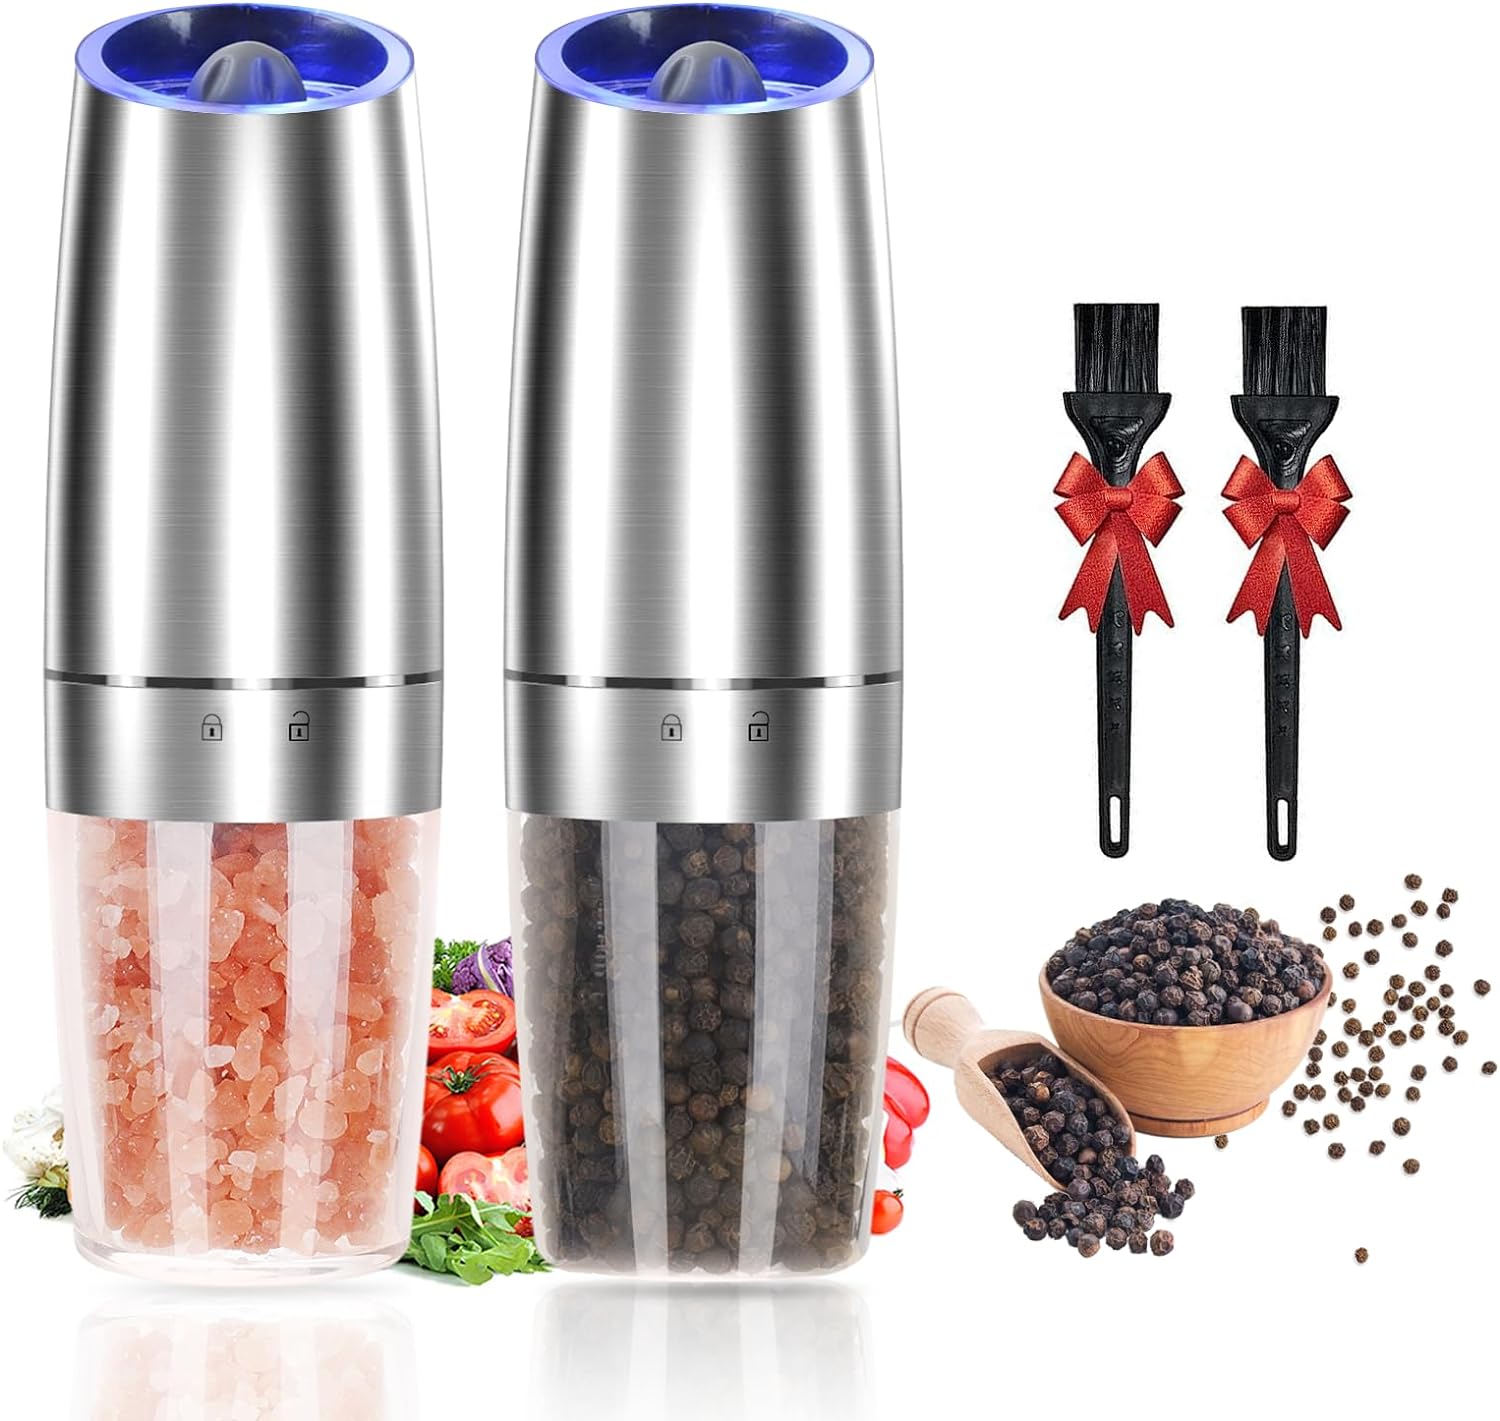 KSL Gravity Electric Salt and Pepper Grinder Set - Battery Operated Mill, Automatic Shaker w/ Light (premium Kit)